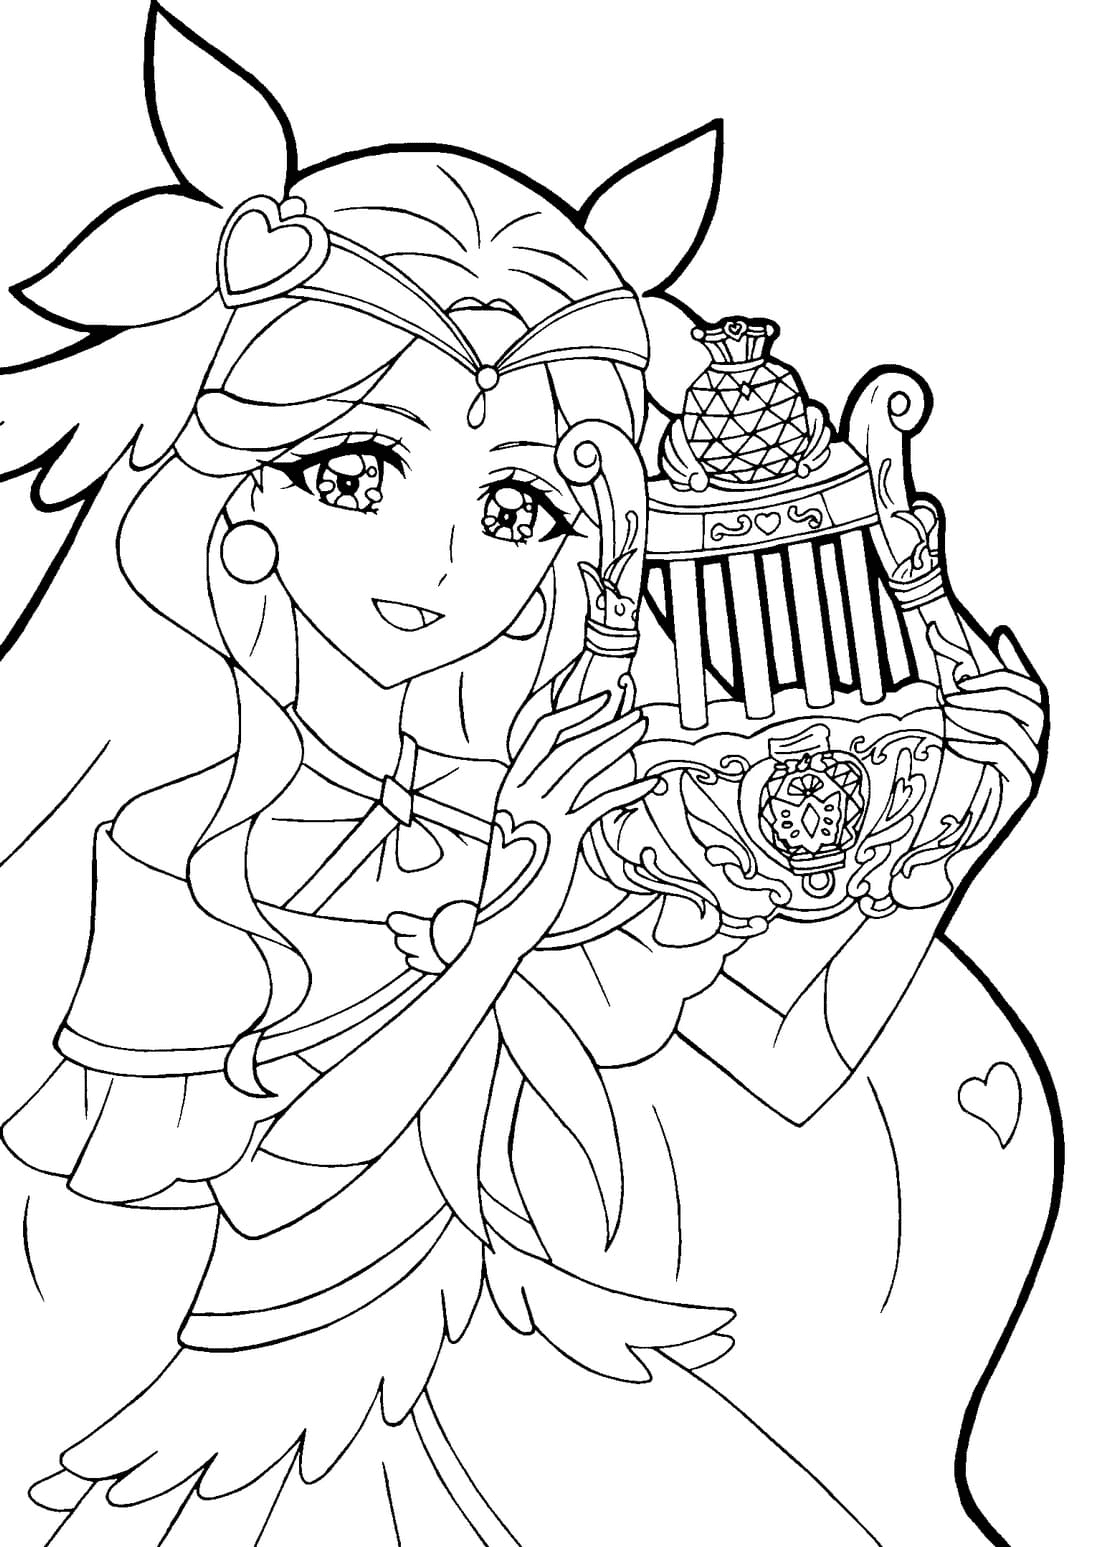 Adorable Girl Coloring Pages